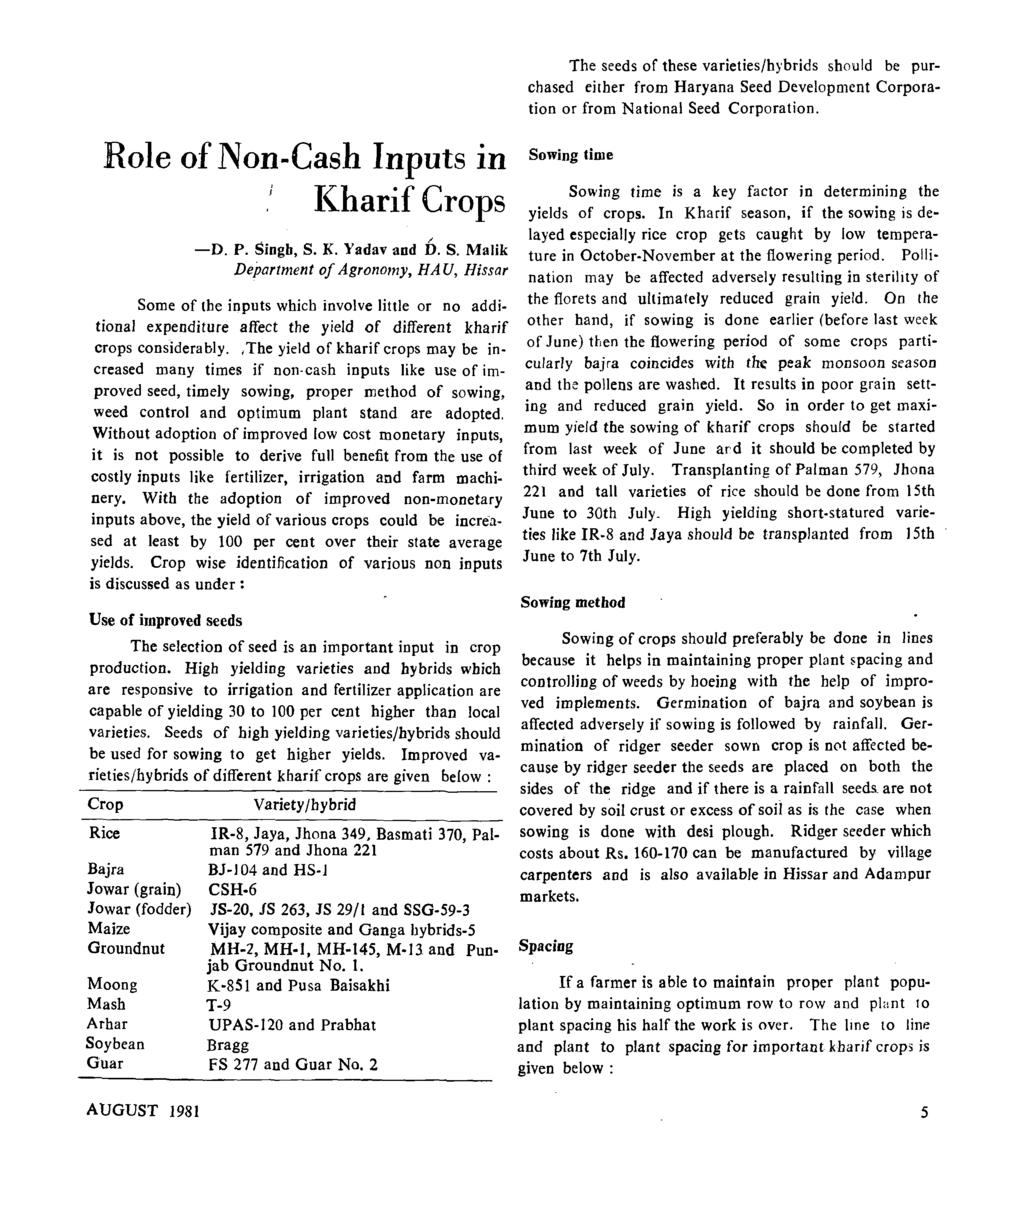 Role of Non-Cash Inputs in I(harif Crops -D. P. Si